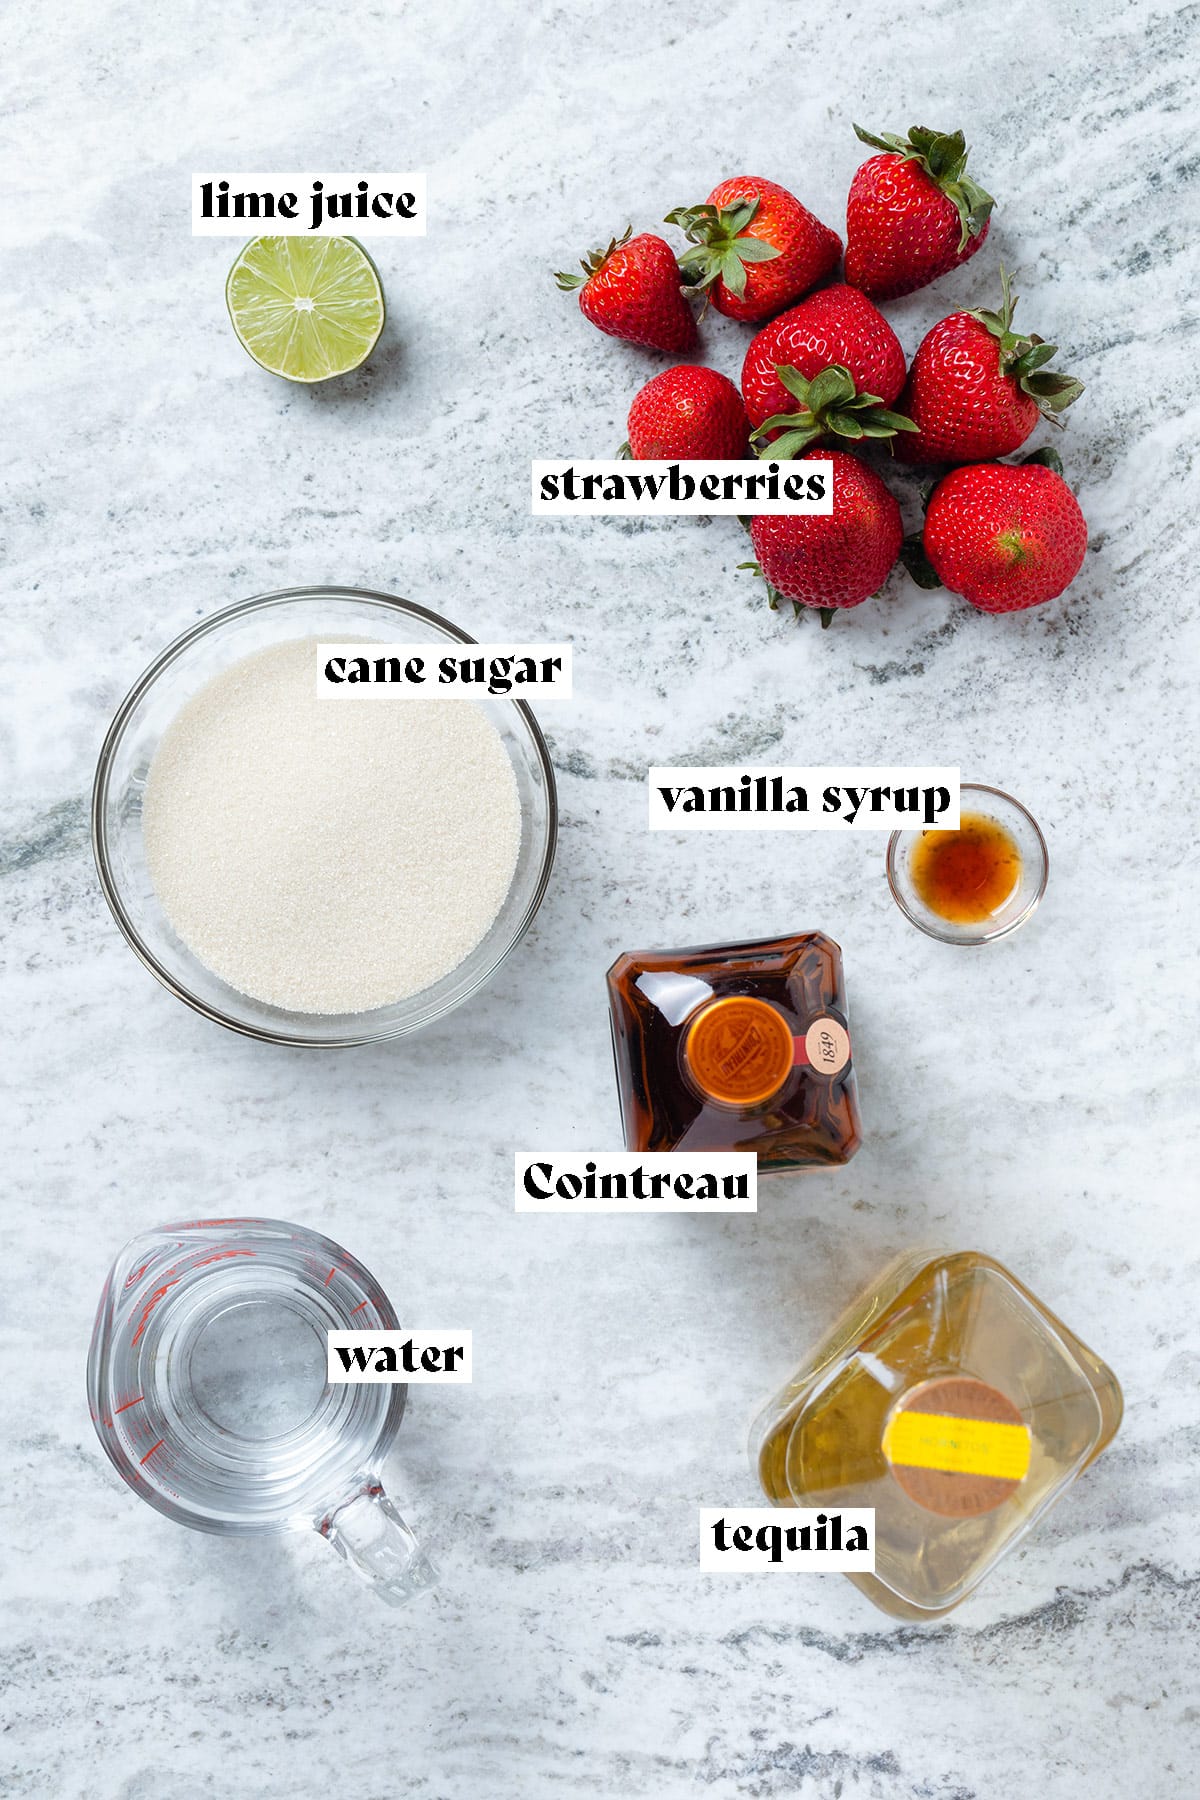 Ingredients for strawberry margarita like tequila, strawberries, and lime juice laid out on a grey stone background.